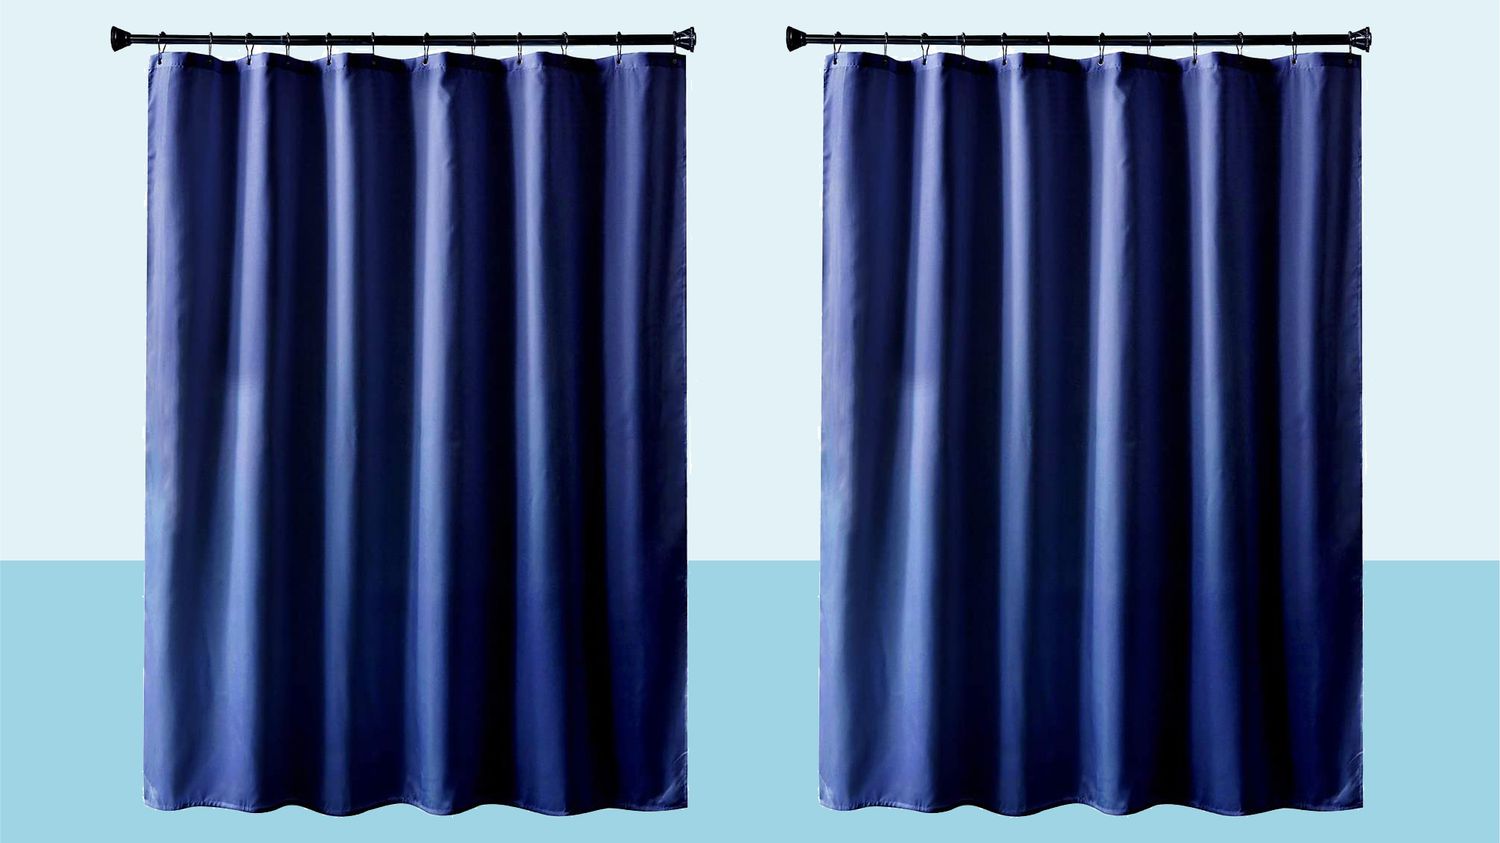 Amazer Polyester Shower Curtain, Do You Need A Liner With Polyester Shower Curtain